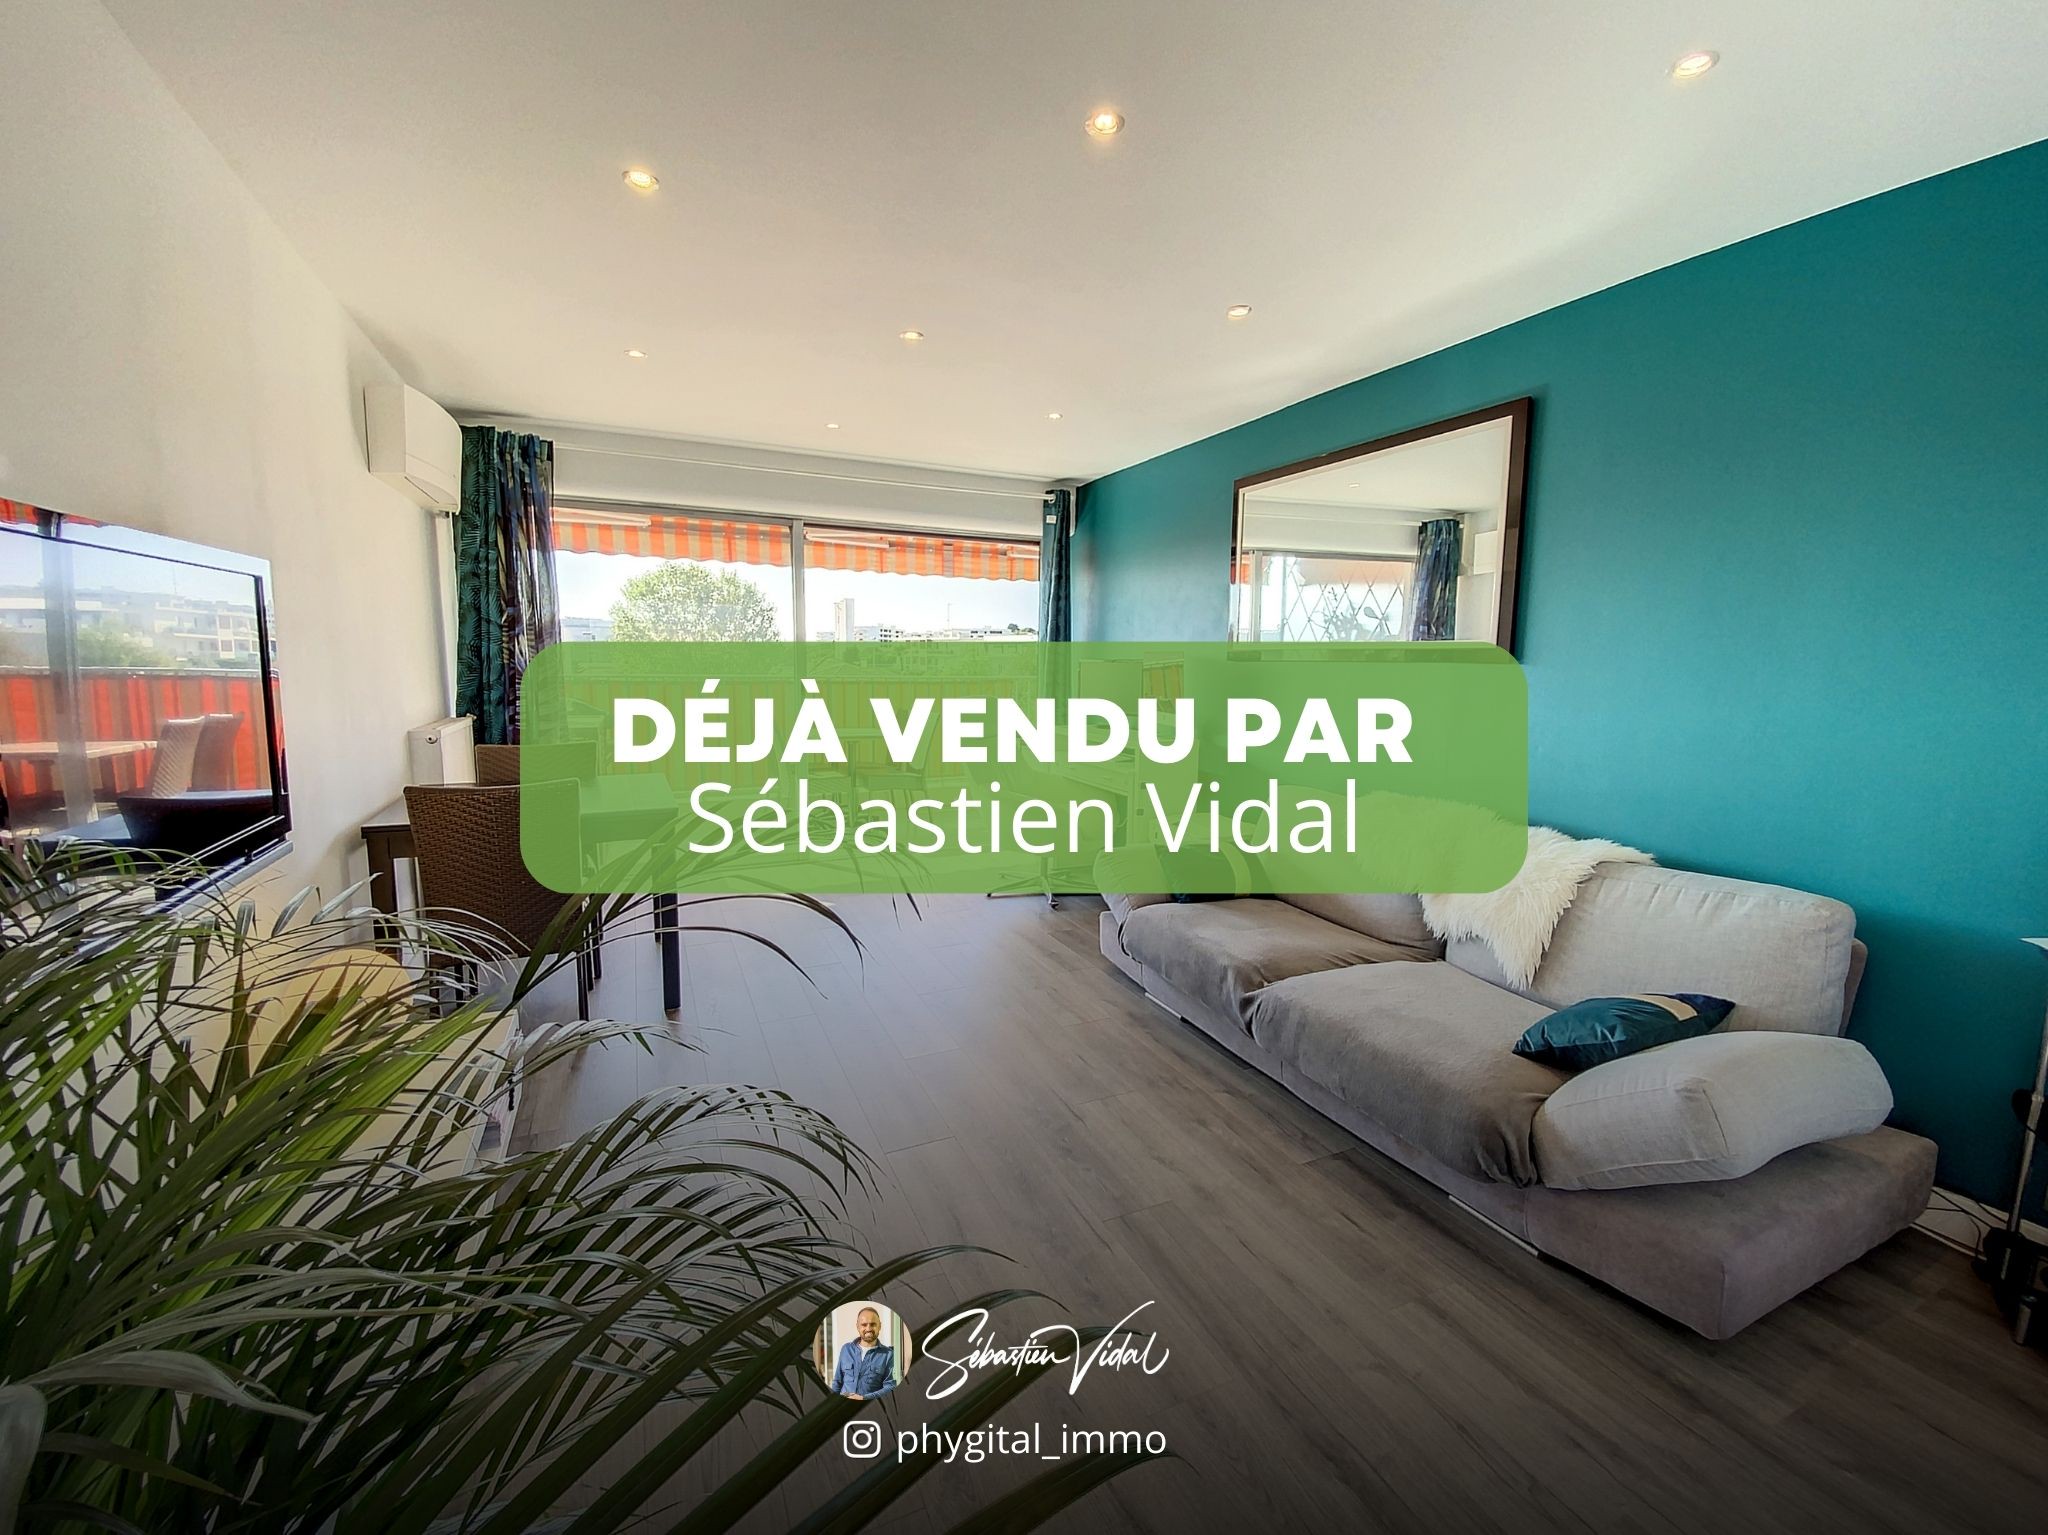 Vente Appartement 65m² 3 Pièces à Antibes (06600) - Phygital.Immo